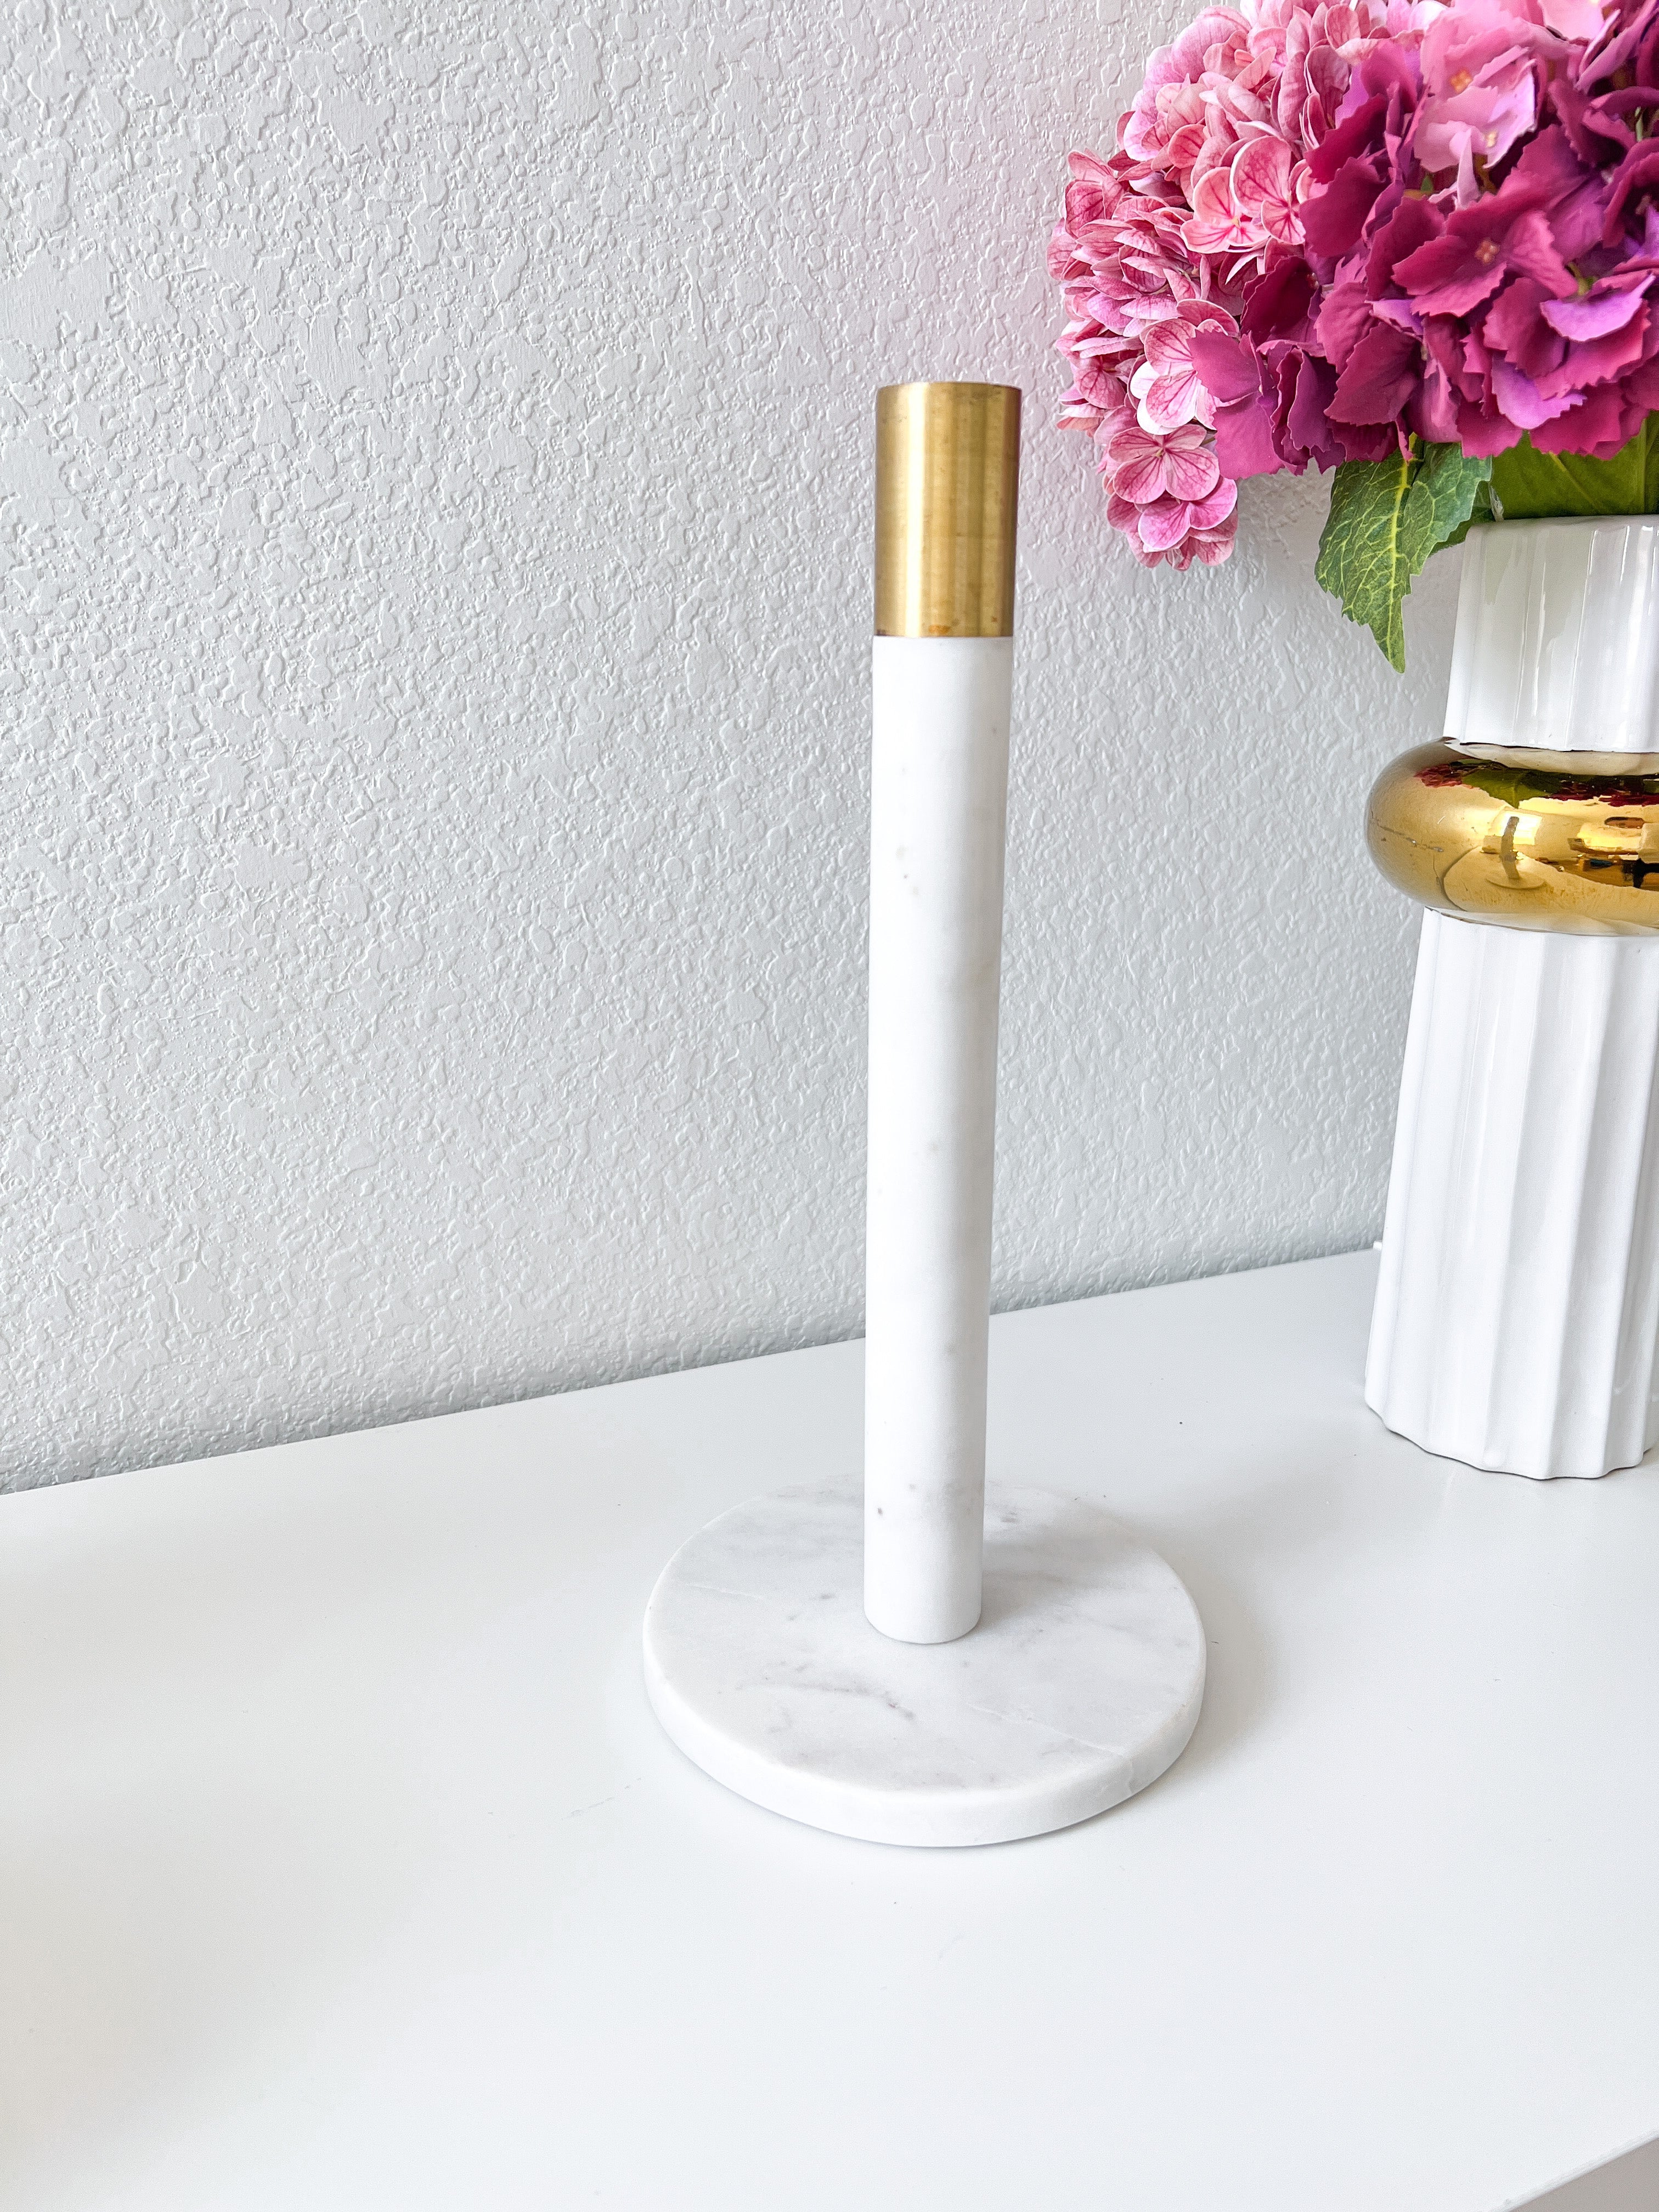 https://cdn.shopify.com/s/files/1/0448/8095/3509/products/white-and-gold-marble-paper-towel-holder-122868.jpg?v=1693133637